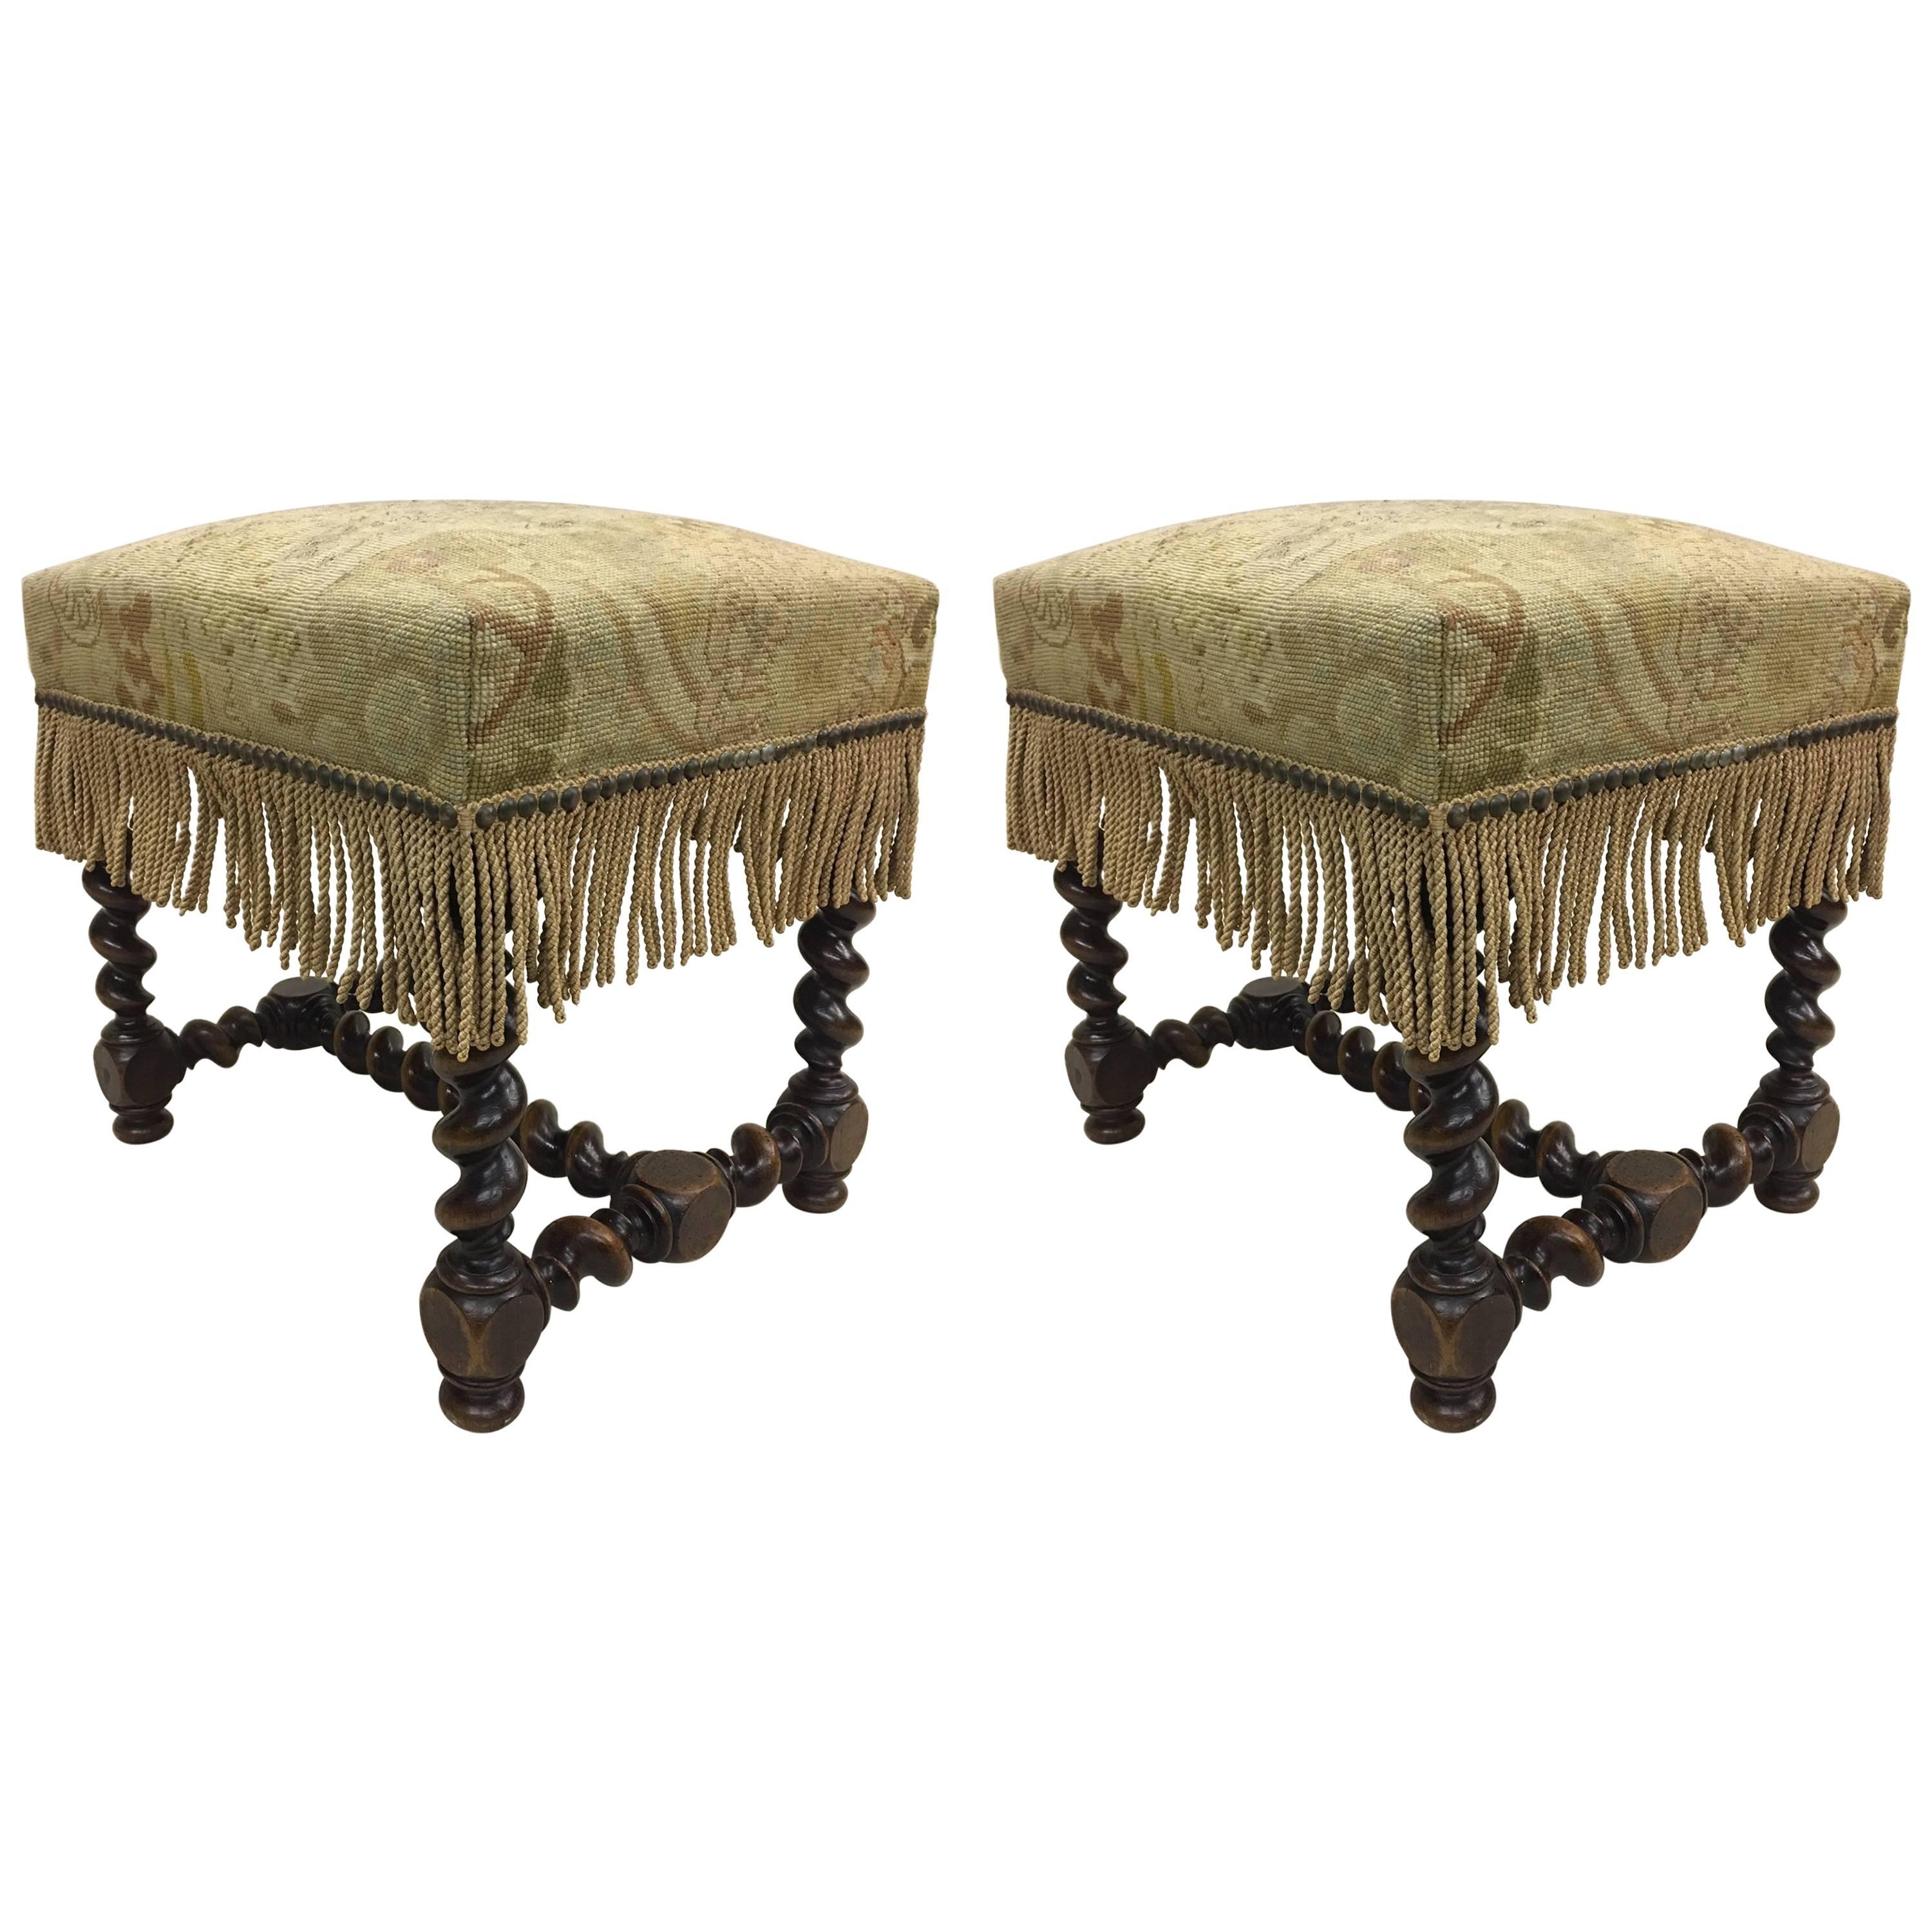 Pair of Hand-Carved French 19th Century Louis XIII Style Barley Twist Benches 